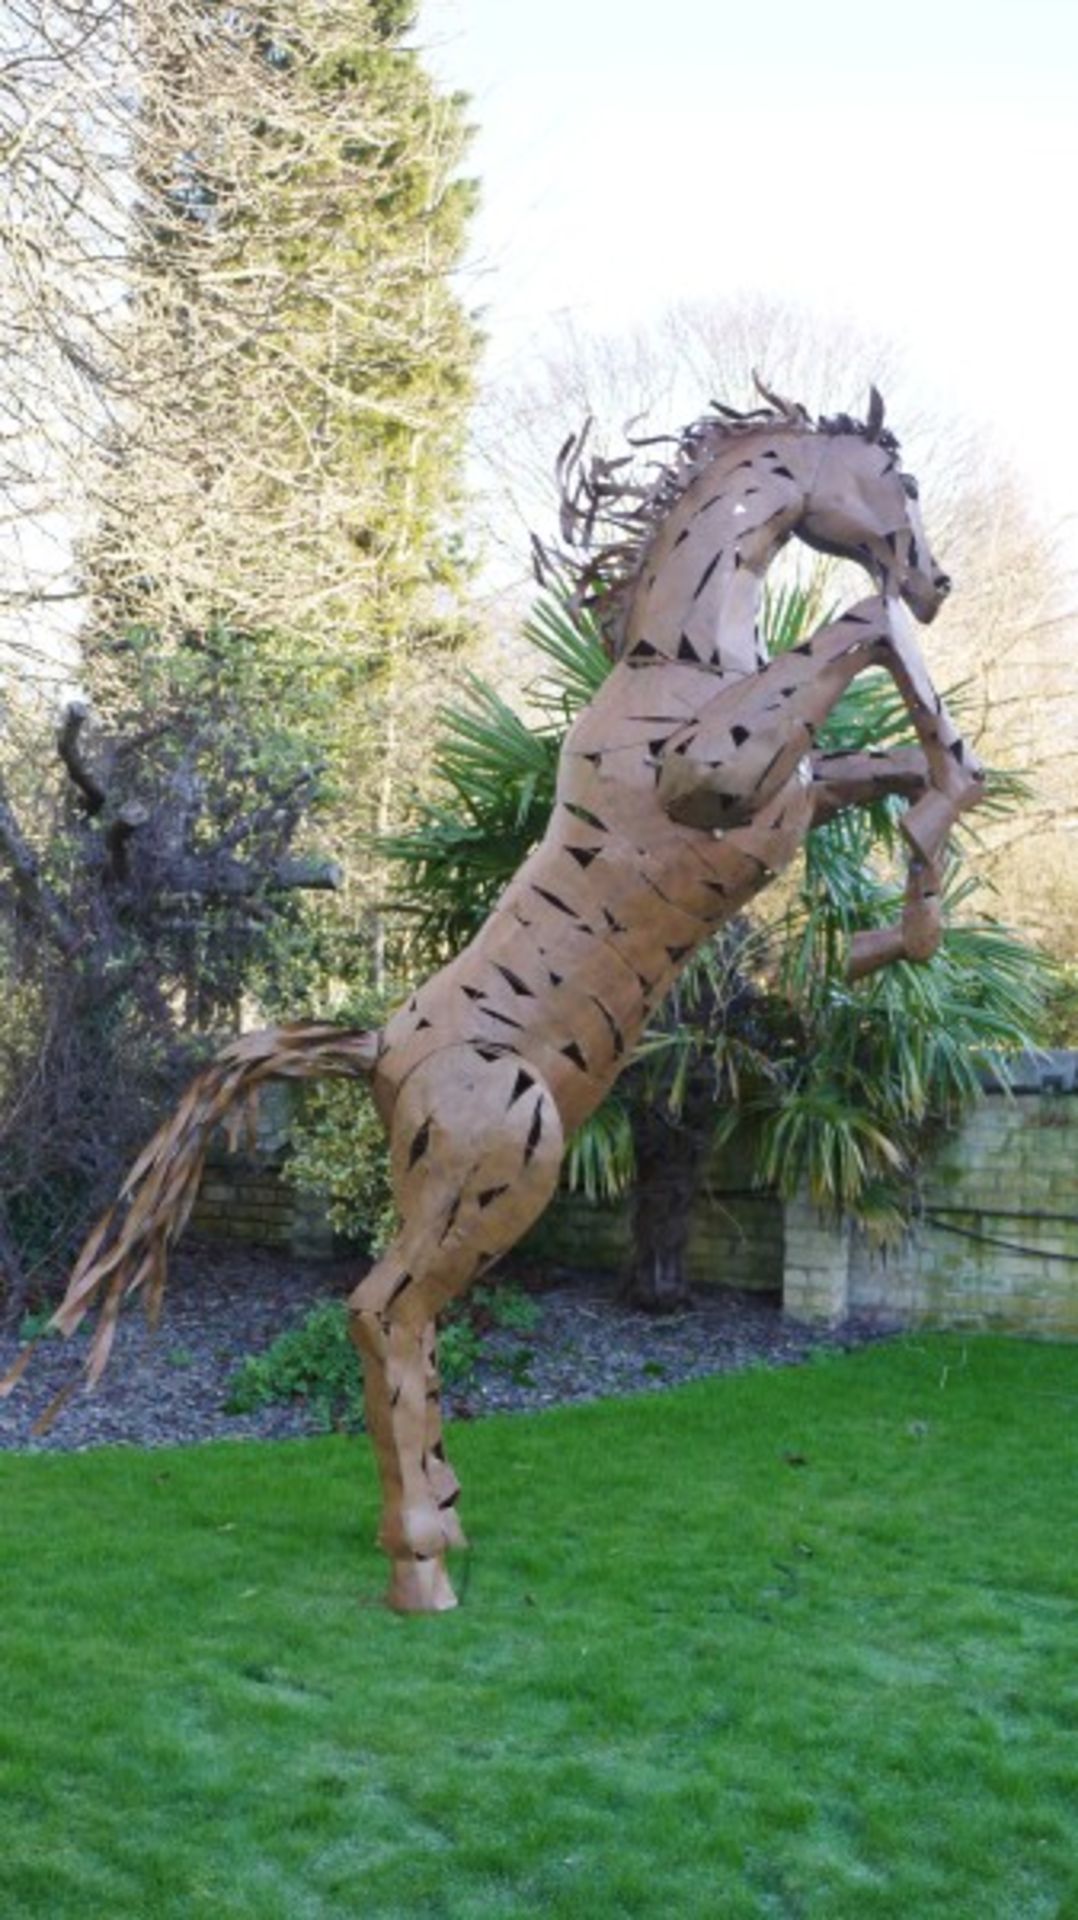 VERY RARE METAL REARING HORSE STATUE - 11 FEET HIGH ! - Image 5 of 6